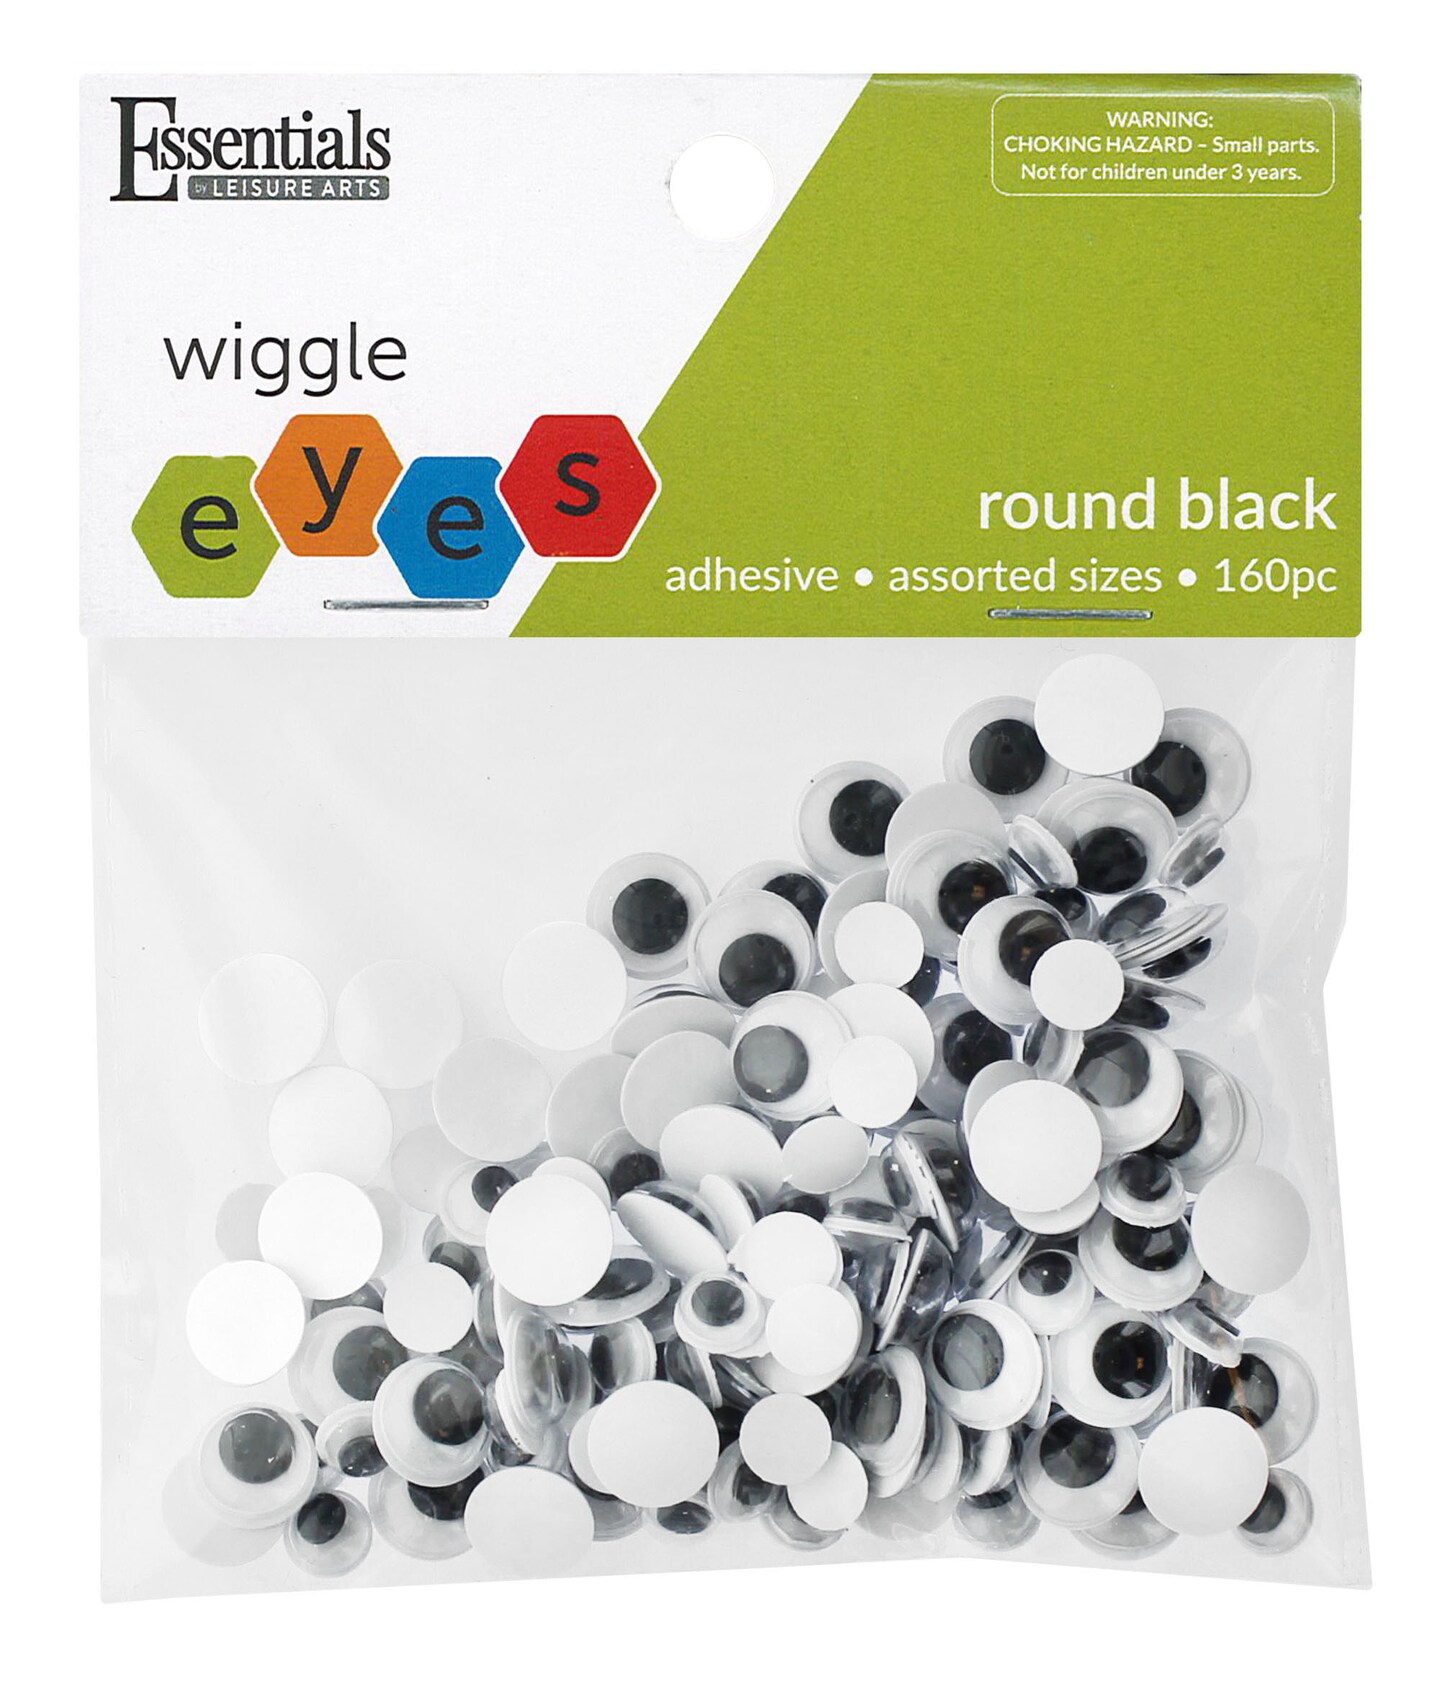 Essentials by Leisure Arts Eyes Sticky Back Moveable Assorted Black 160pc Googly Eyes, Google Eyes for Crafts, Big Googly Eyes for Crafts, Wiggle Eyes, Craft Eyes